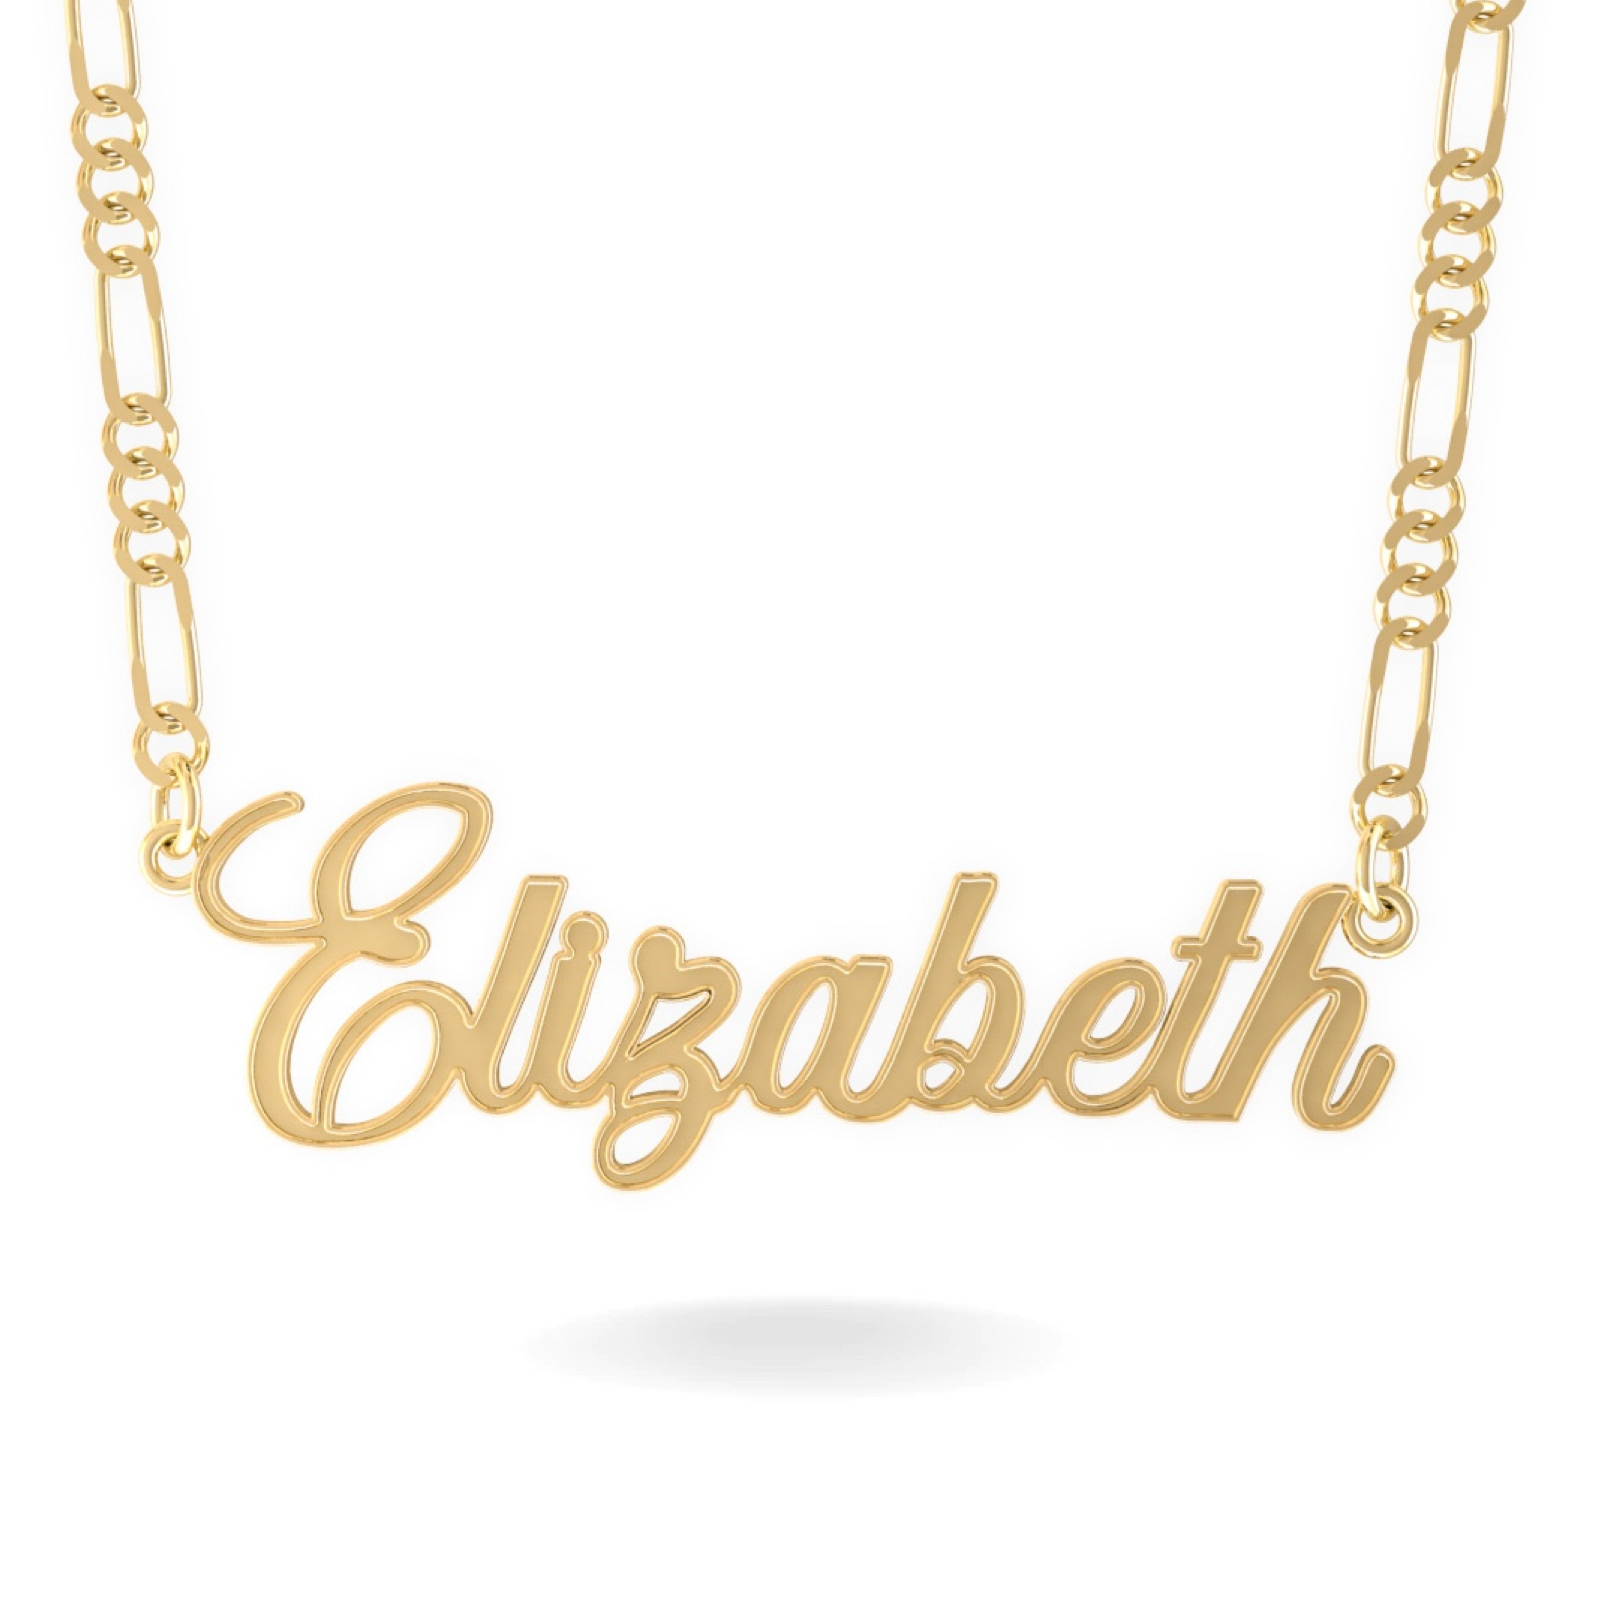 14K YELLOW GOLD FIGARO FLOATING SCRIPT BORDER NAME NECKLACE